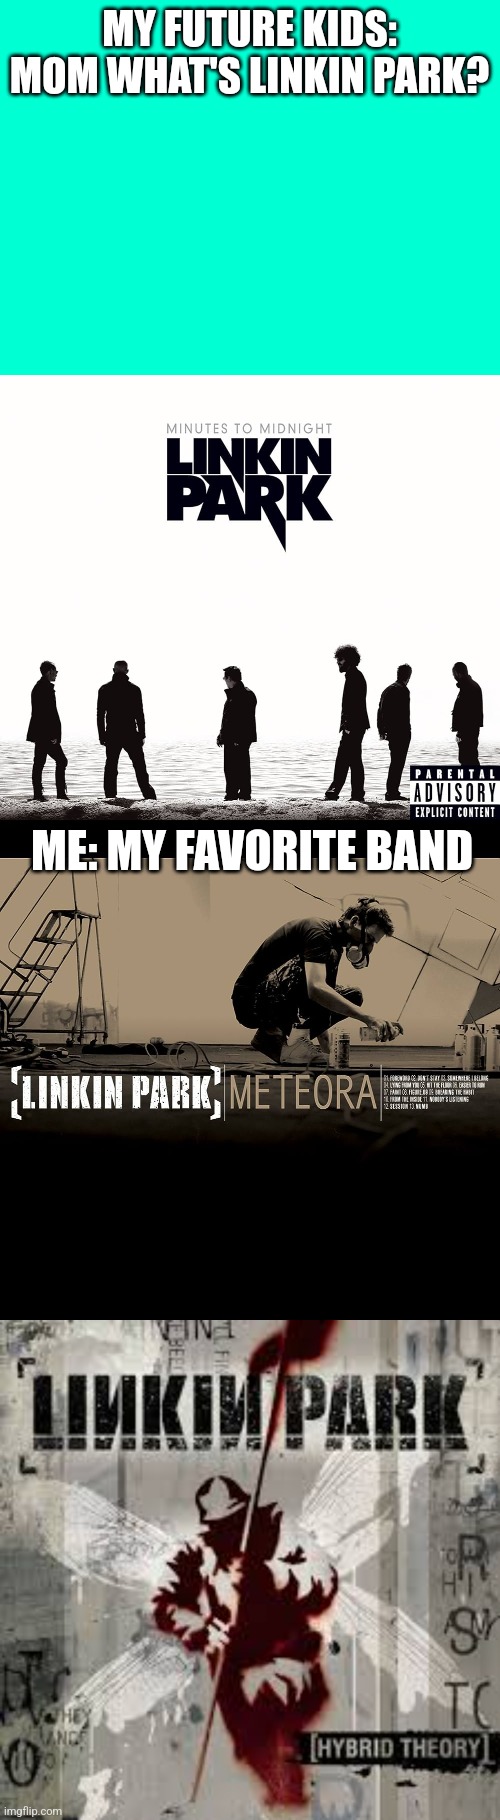 Linkin Park | MY FUTURE KIDS: MOM WHAT'S LINKIN PARK? ME: MY FAVORITE BAND | image tagged in linkin park,fun,music | made w/ Imgflip meme maker